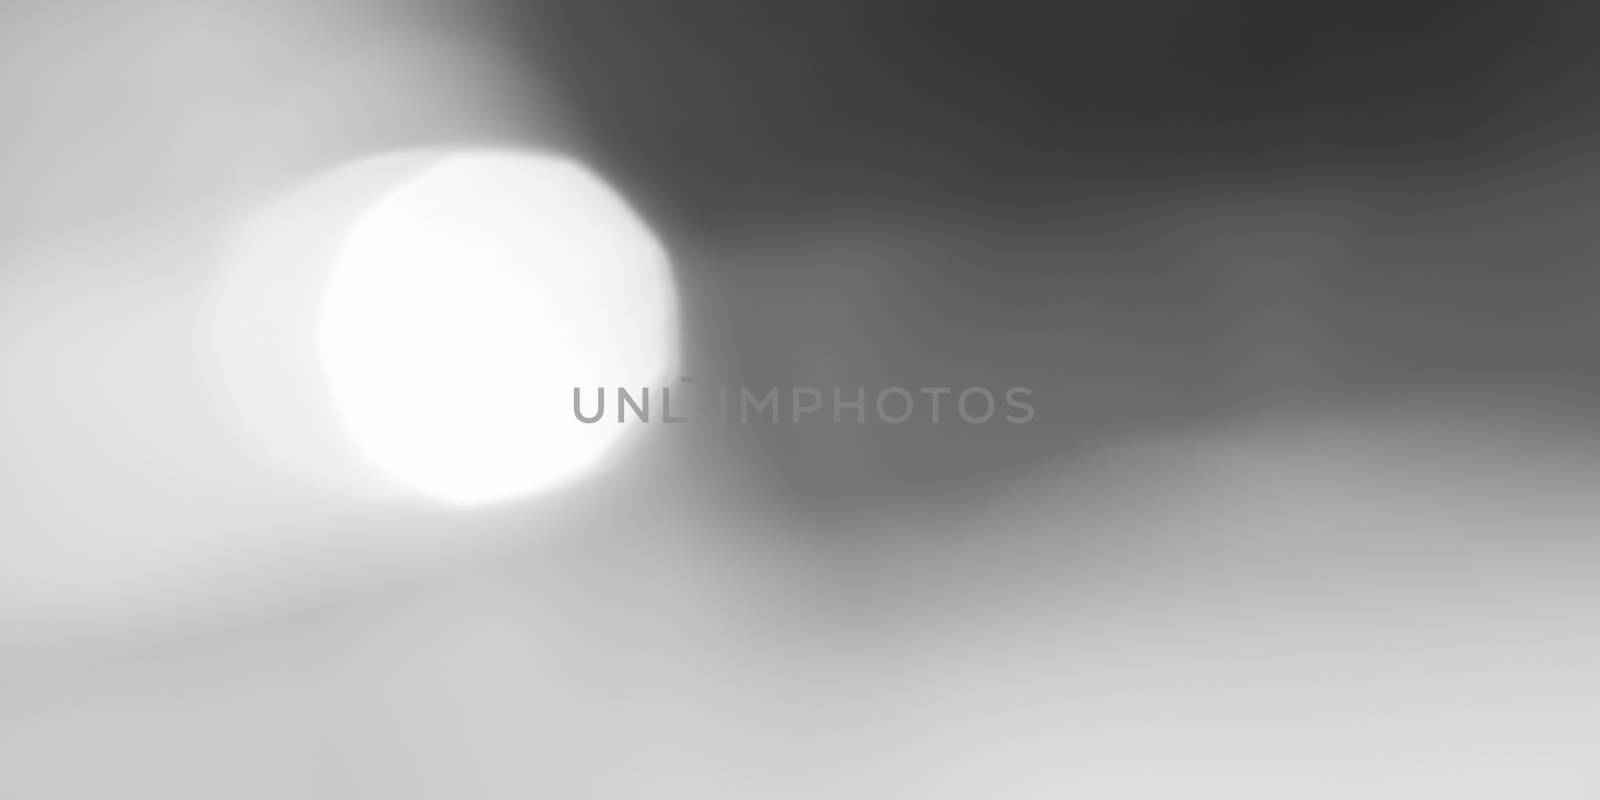 Abstract black and white bokeh background, defocused light